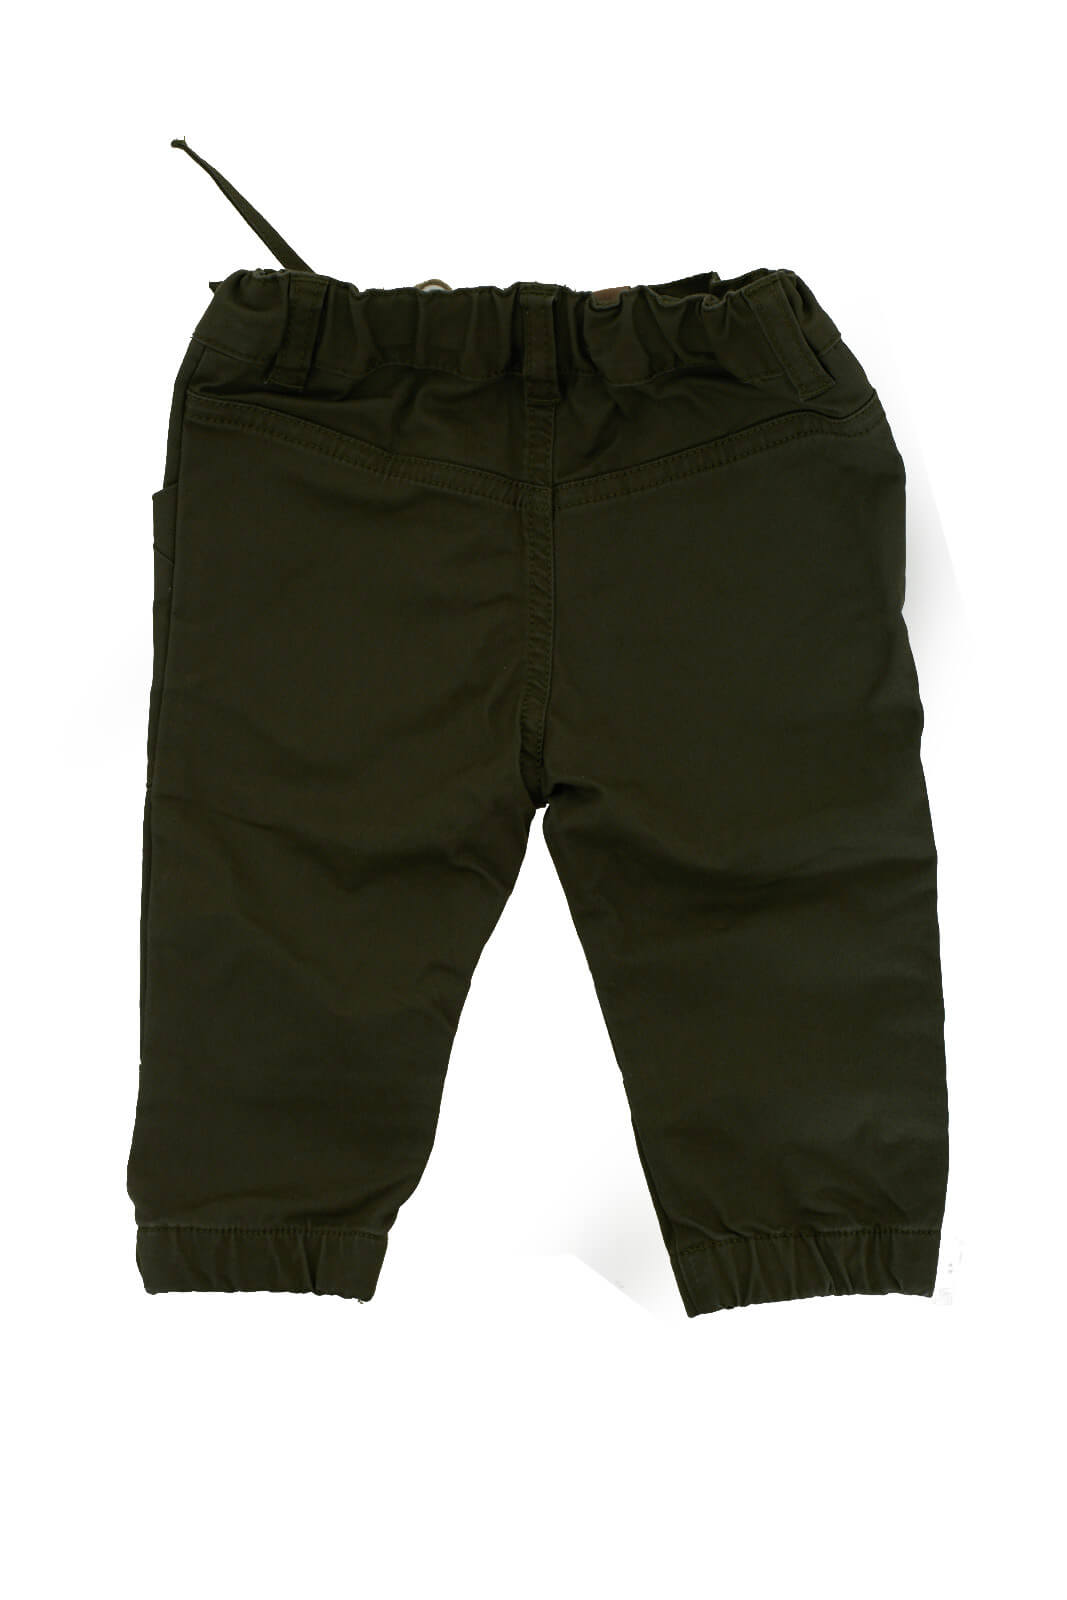 Timberland children's trousers